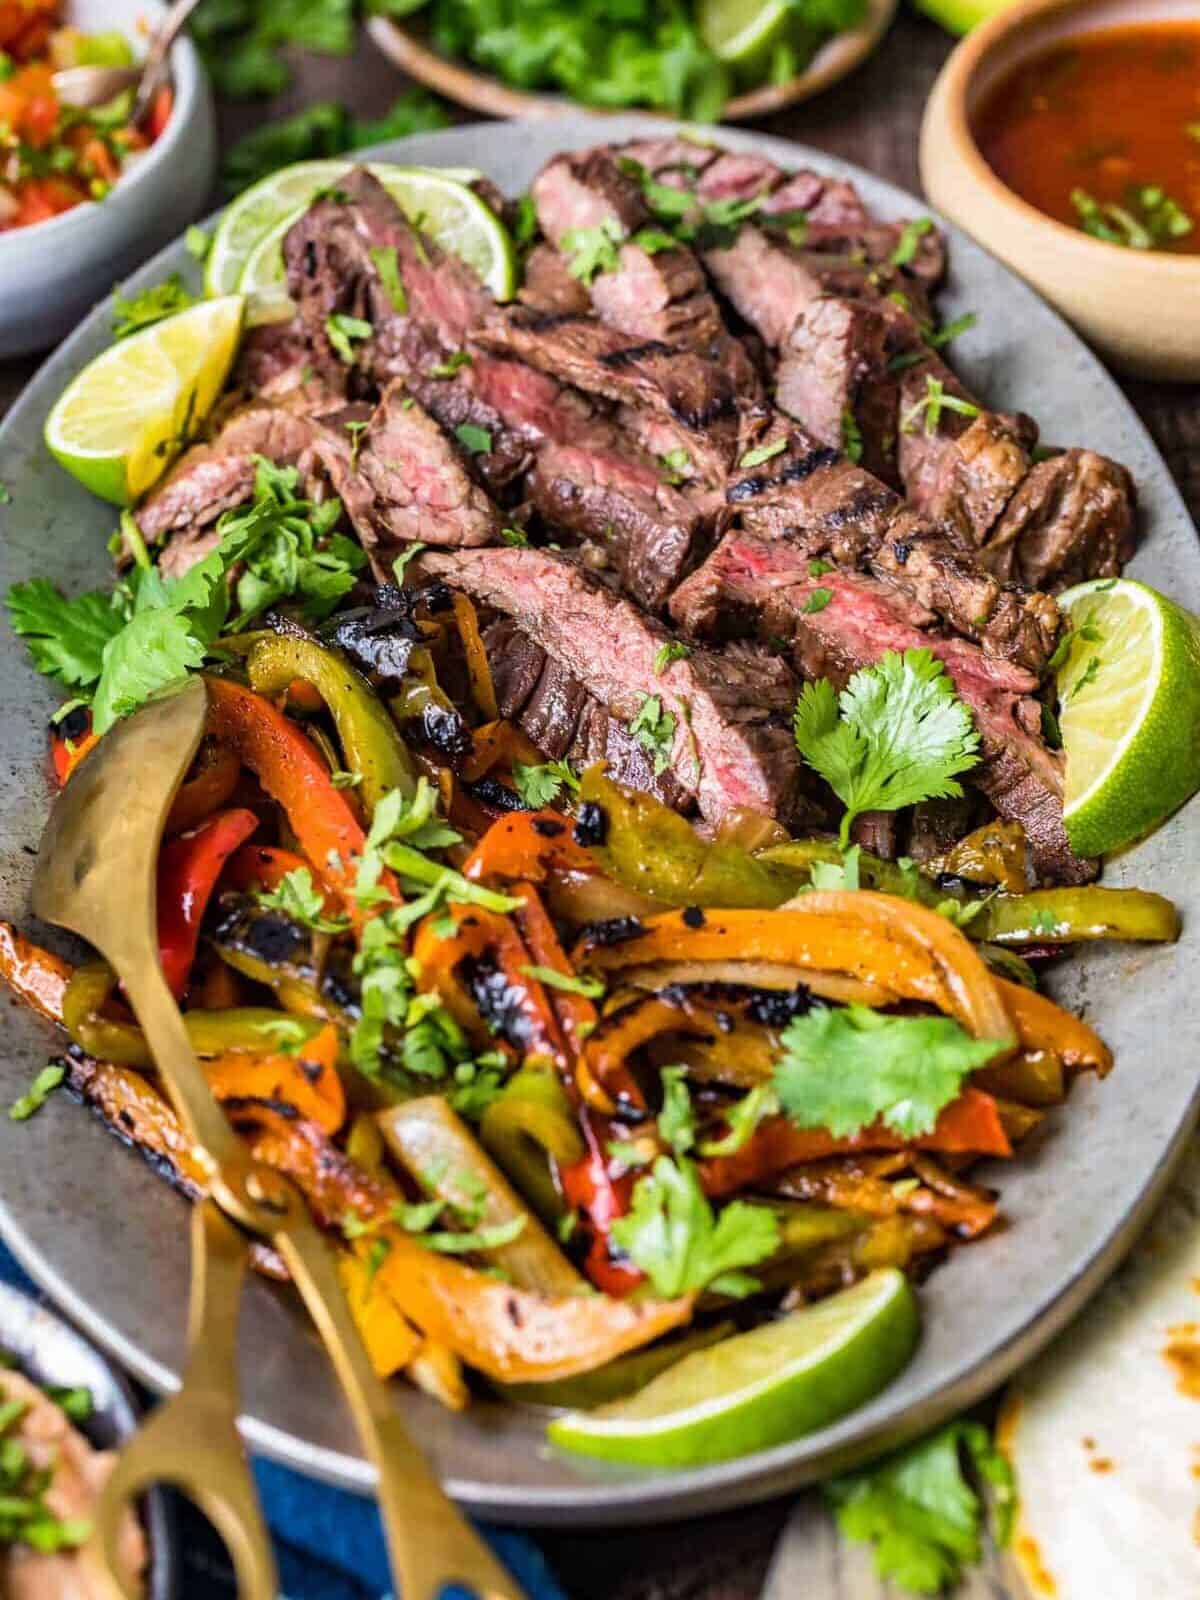 How Long To Cook Beef Fajitas On Grill?